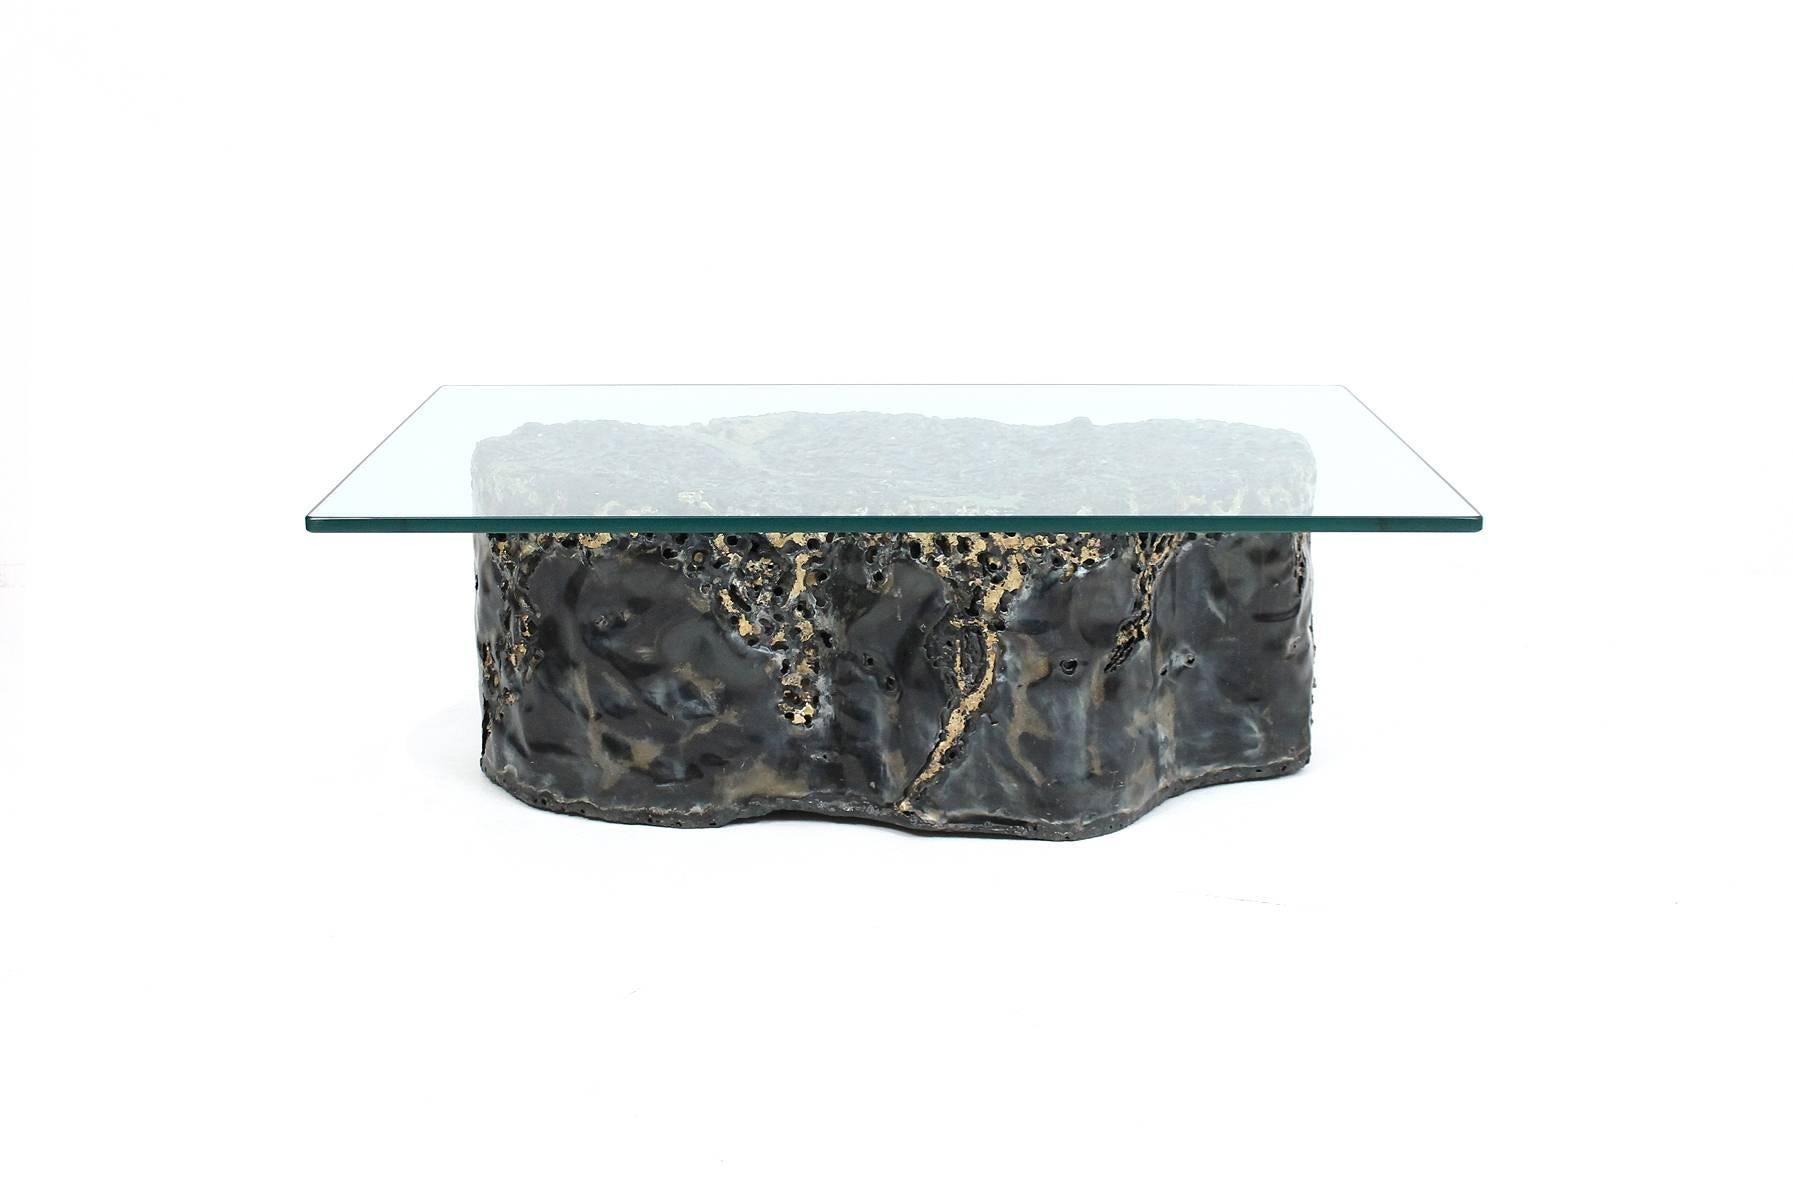 Artist made bronze coffee table by Edward Garfinkle. This sculpted and torched bronze table was executed in 1970 and is titled “Volcanic I”. Its biomorphic shape and execution is reminiscent of similar tables by Silas Seandel and Karl Springer.